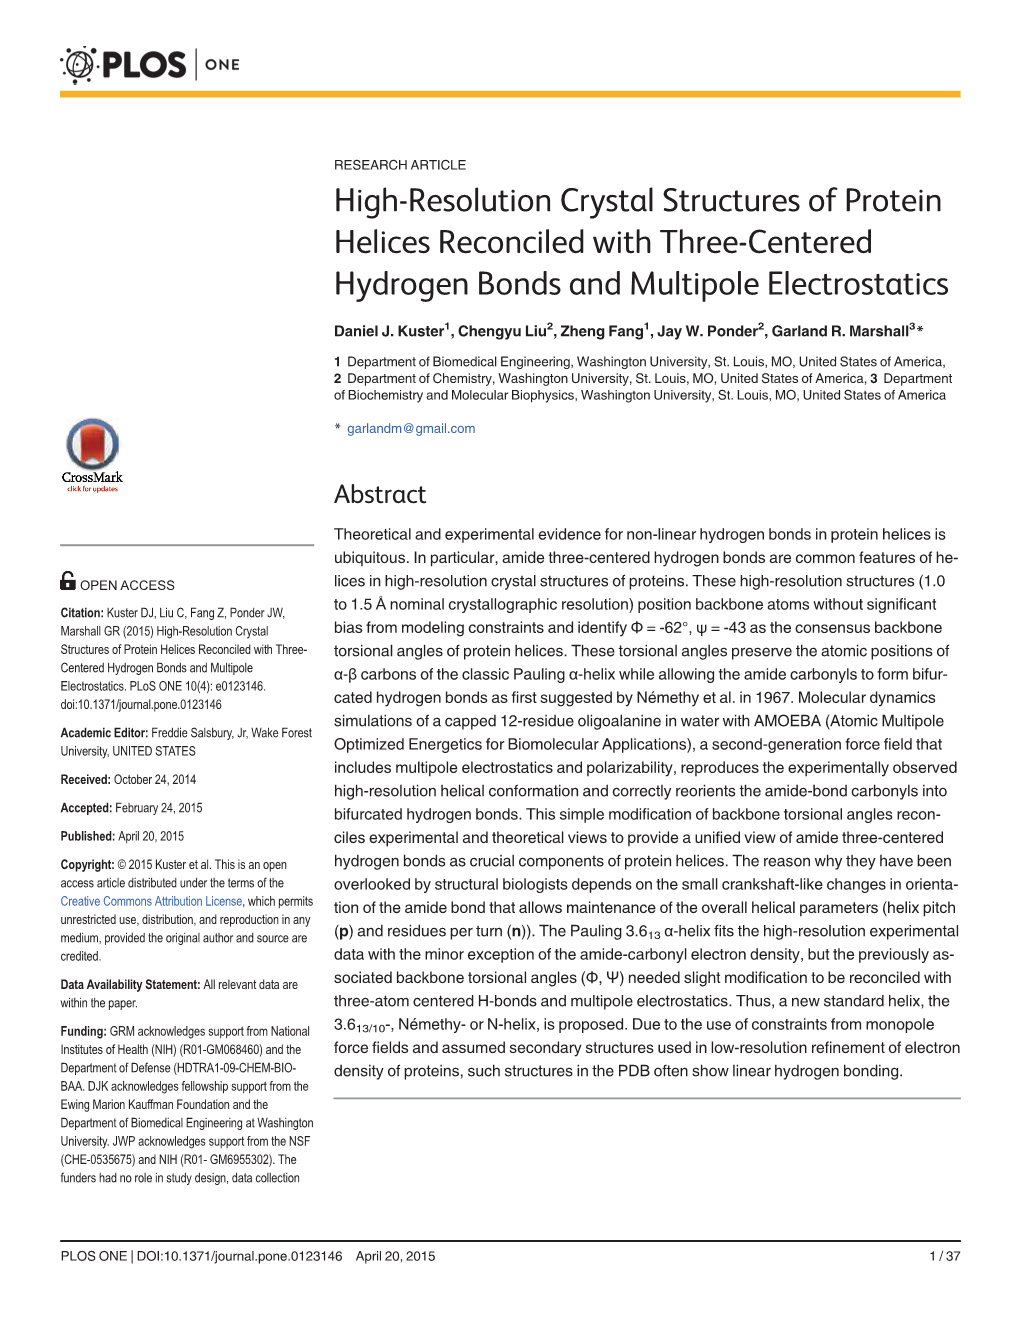 High-Resolution Crystal Structures of Protein Helices Reconciled with Three-Centered Hydrogen Bonds and Multipole Electrostatics